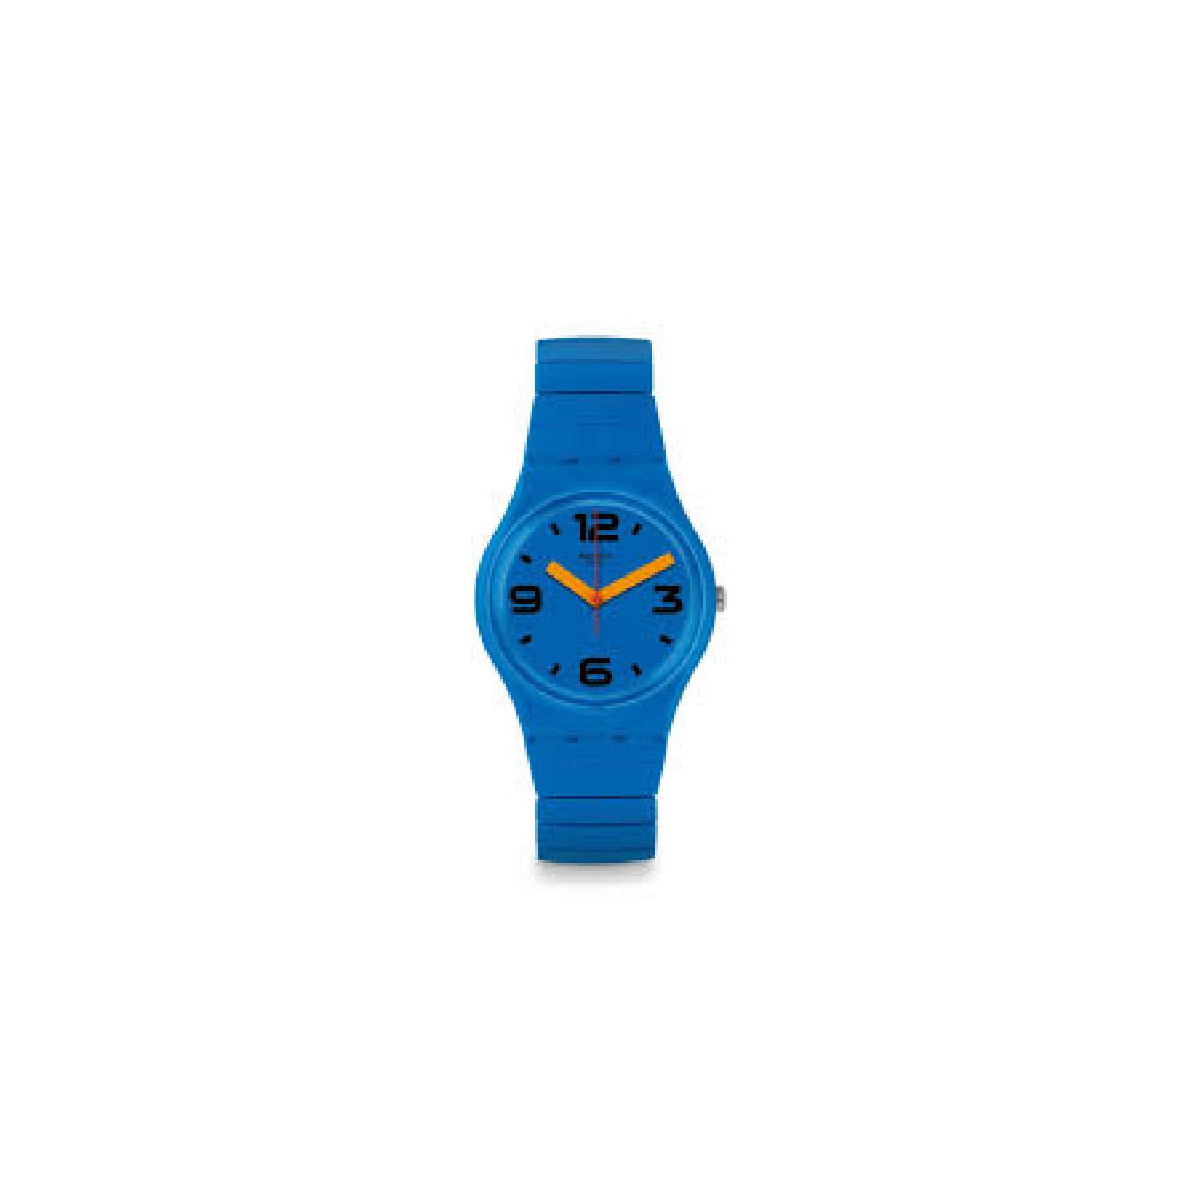 SWATCH_PEPEBLU-S_GN251B_Outlet_50%